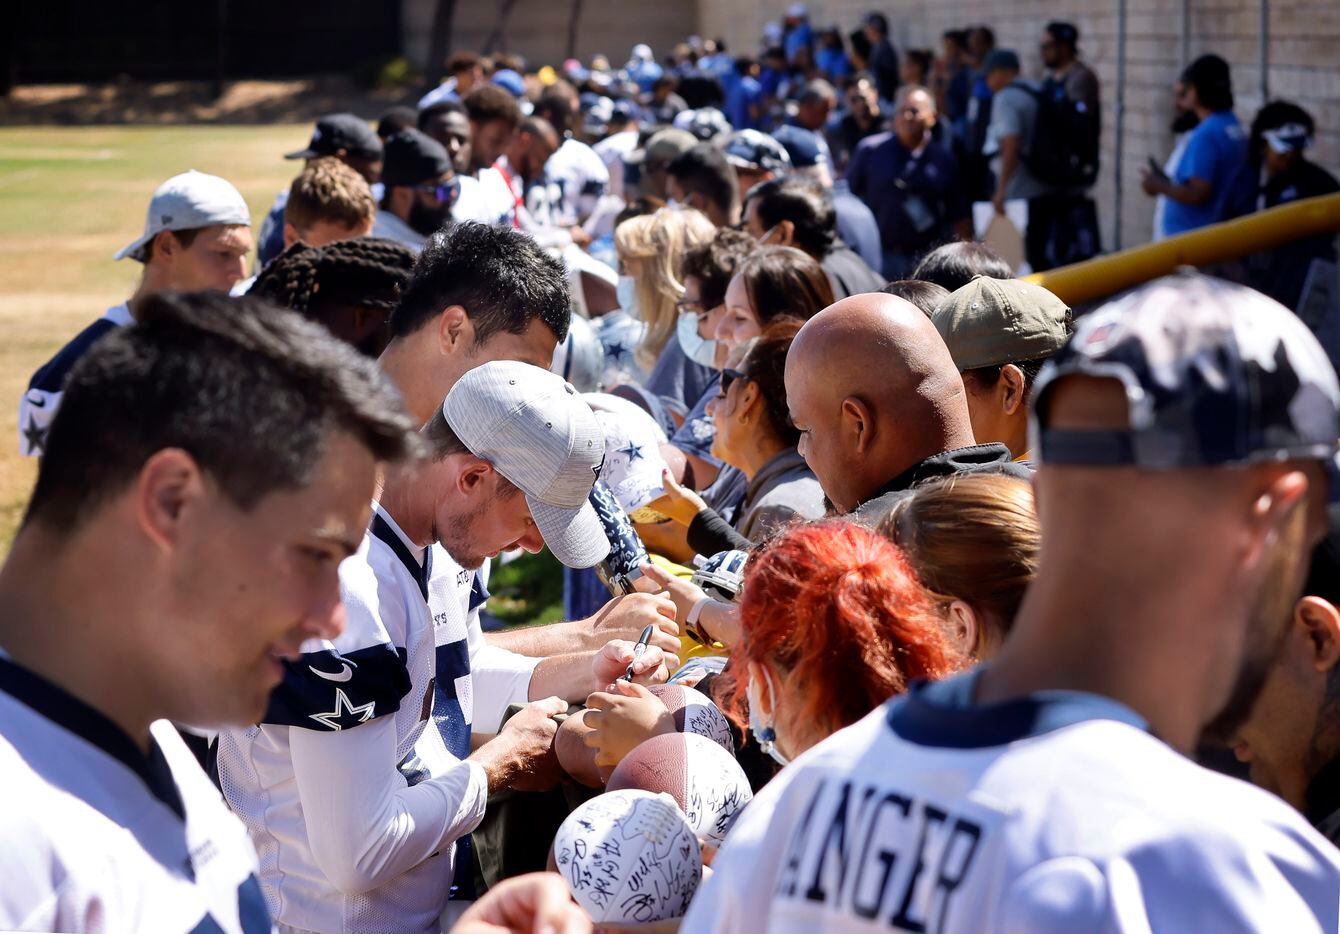 Dallas Cowboys sign autographs for volunteers following their last practice of training camp...